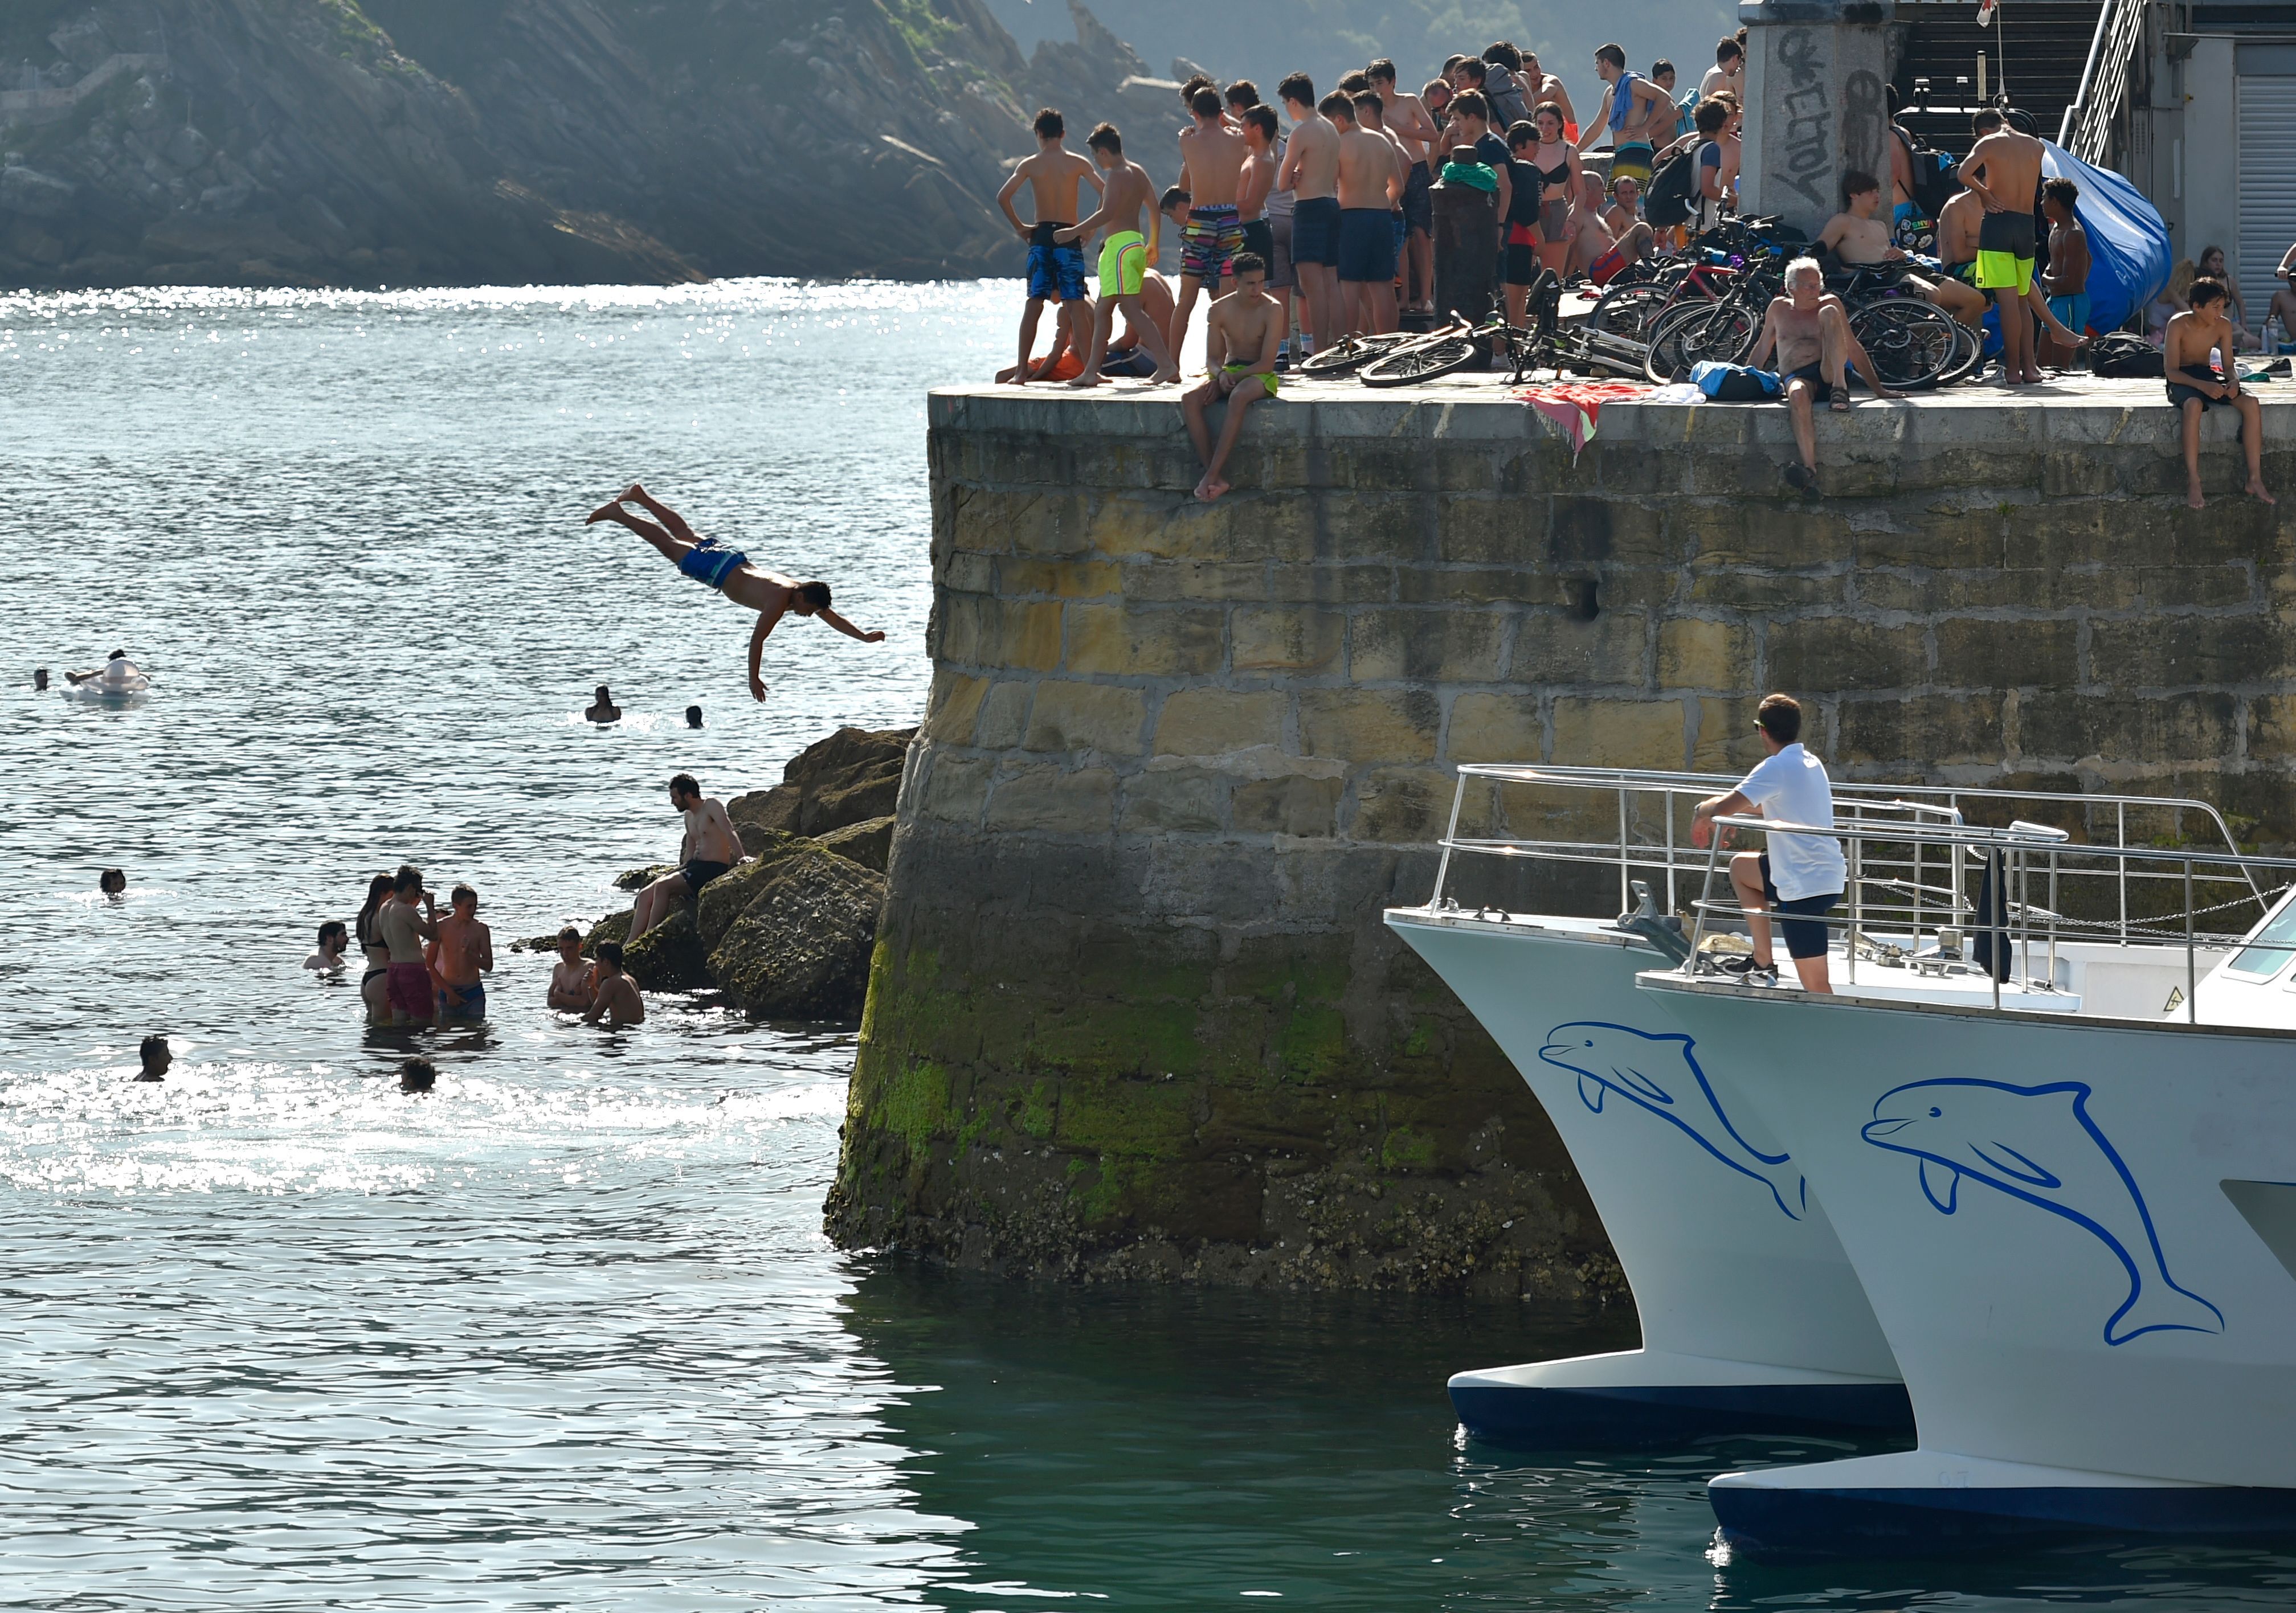 A man dives as people cool off at La Concha beach in the northern Spanish city of San Sebastian.